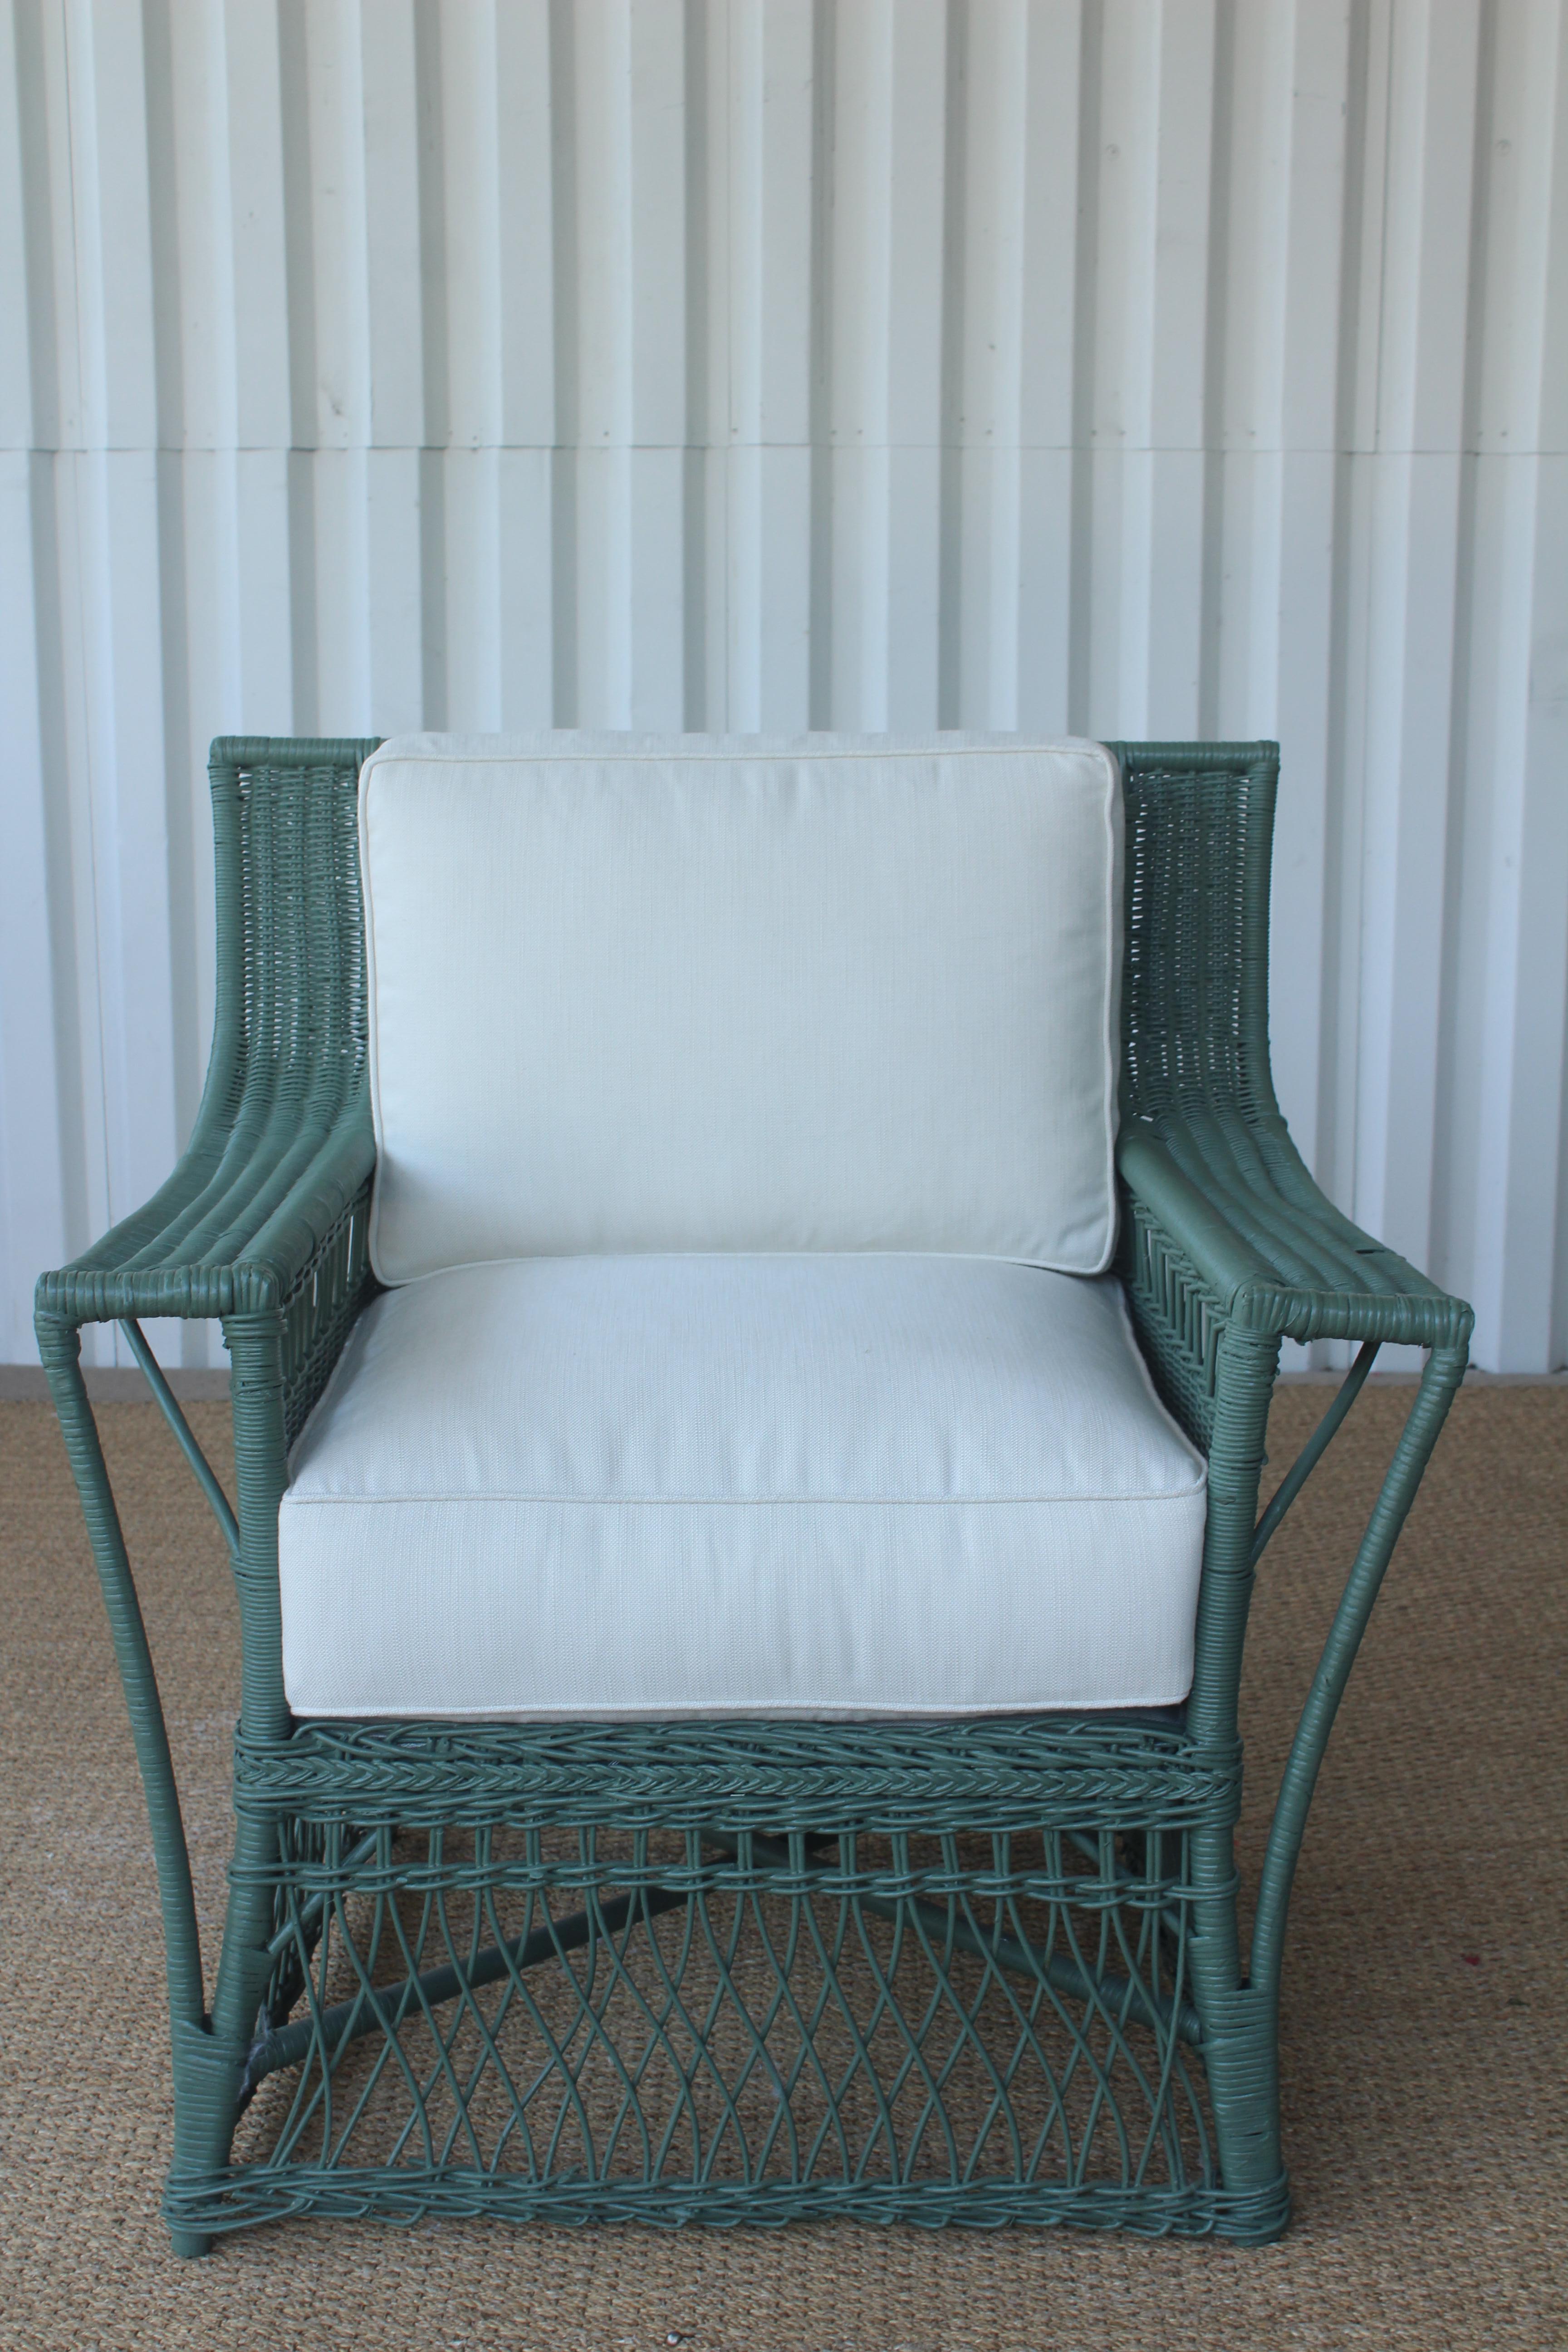 Vintage 1930s American wicker lounge. New painted finish. New cushions upholstered in Belgian linen.